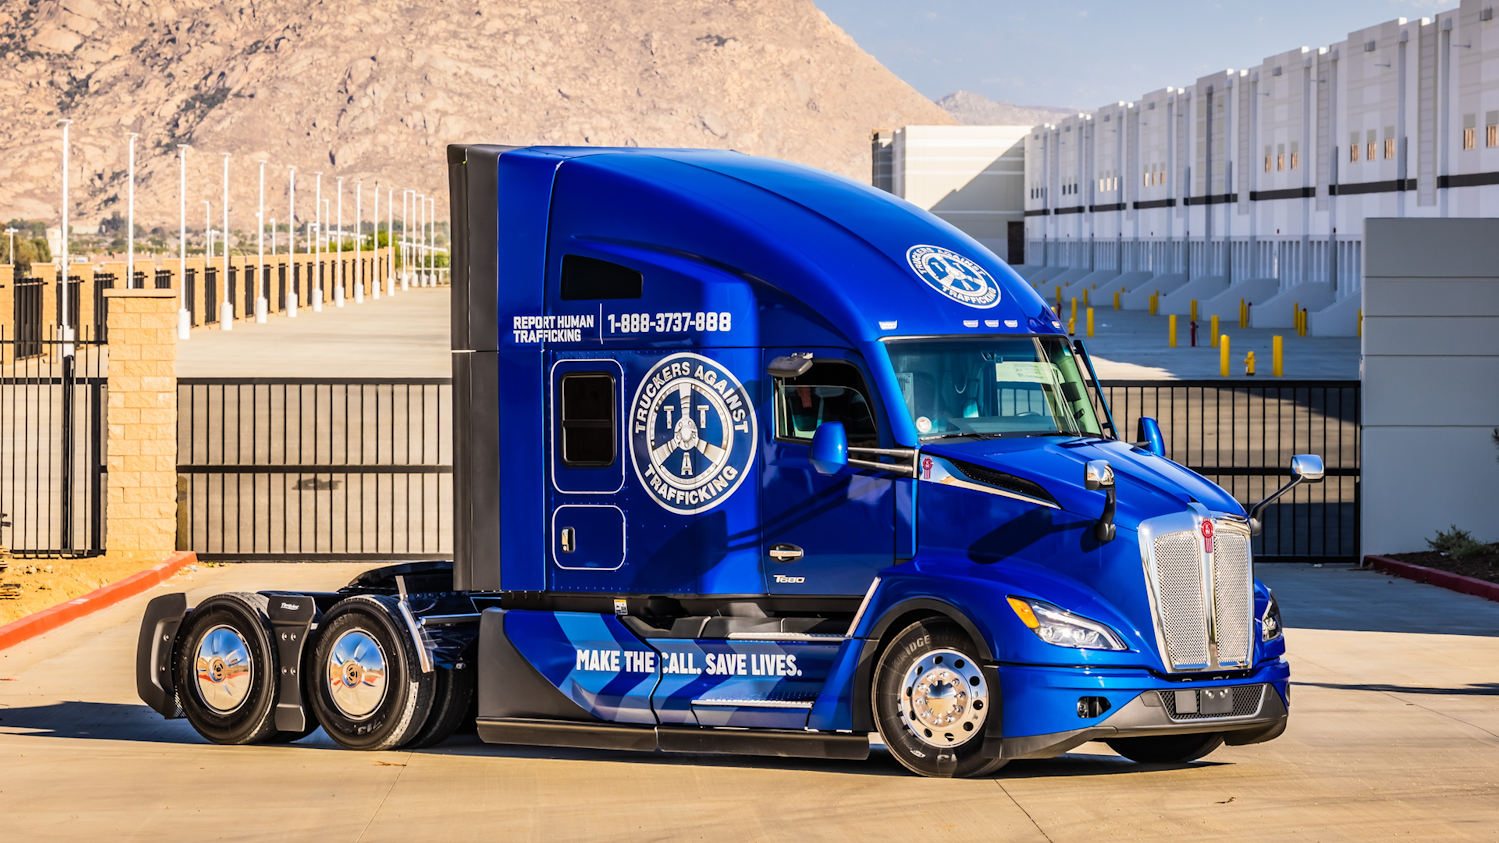 The &ldquo;Everyday Heroes&rdquo; Kenworth T680 Next Generation was auctioned recently at Ritchie Bros. in Perris, California. The winning bid, submitted by Serg Kodryanu, CEO of Freestyle Transport, resulted in $260,000 in support of Truckers Against Trafficking.